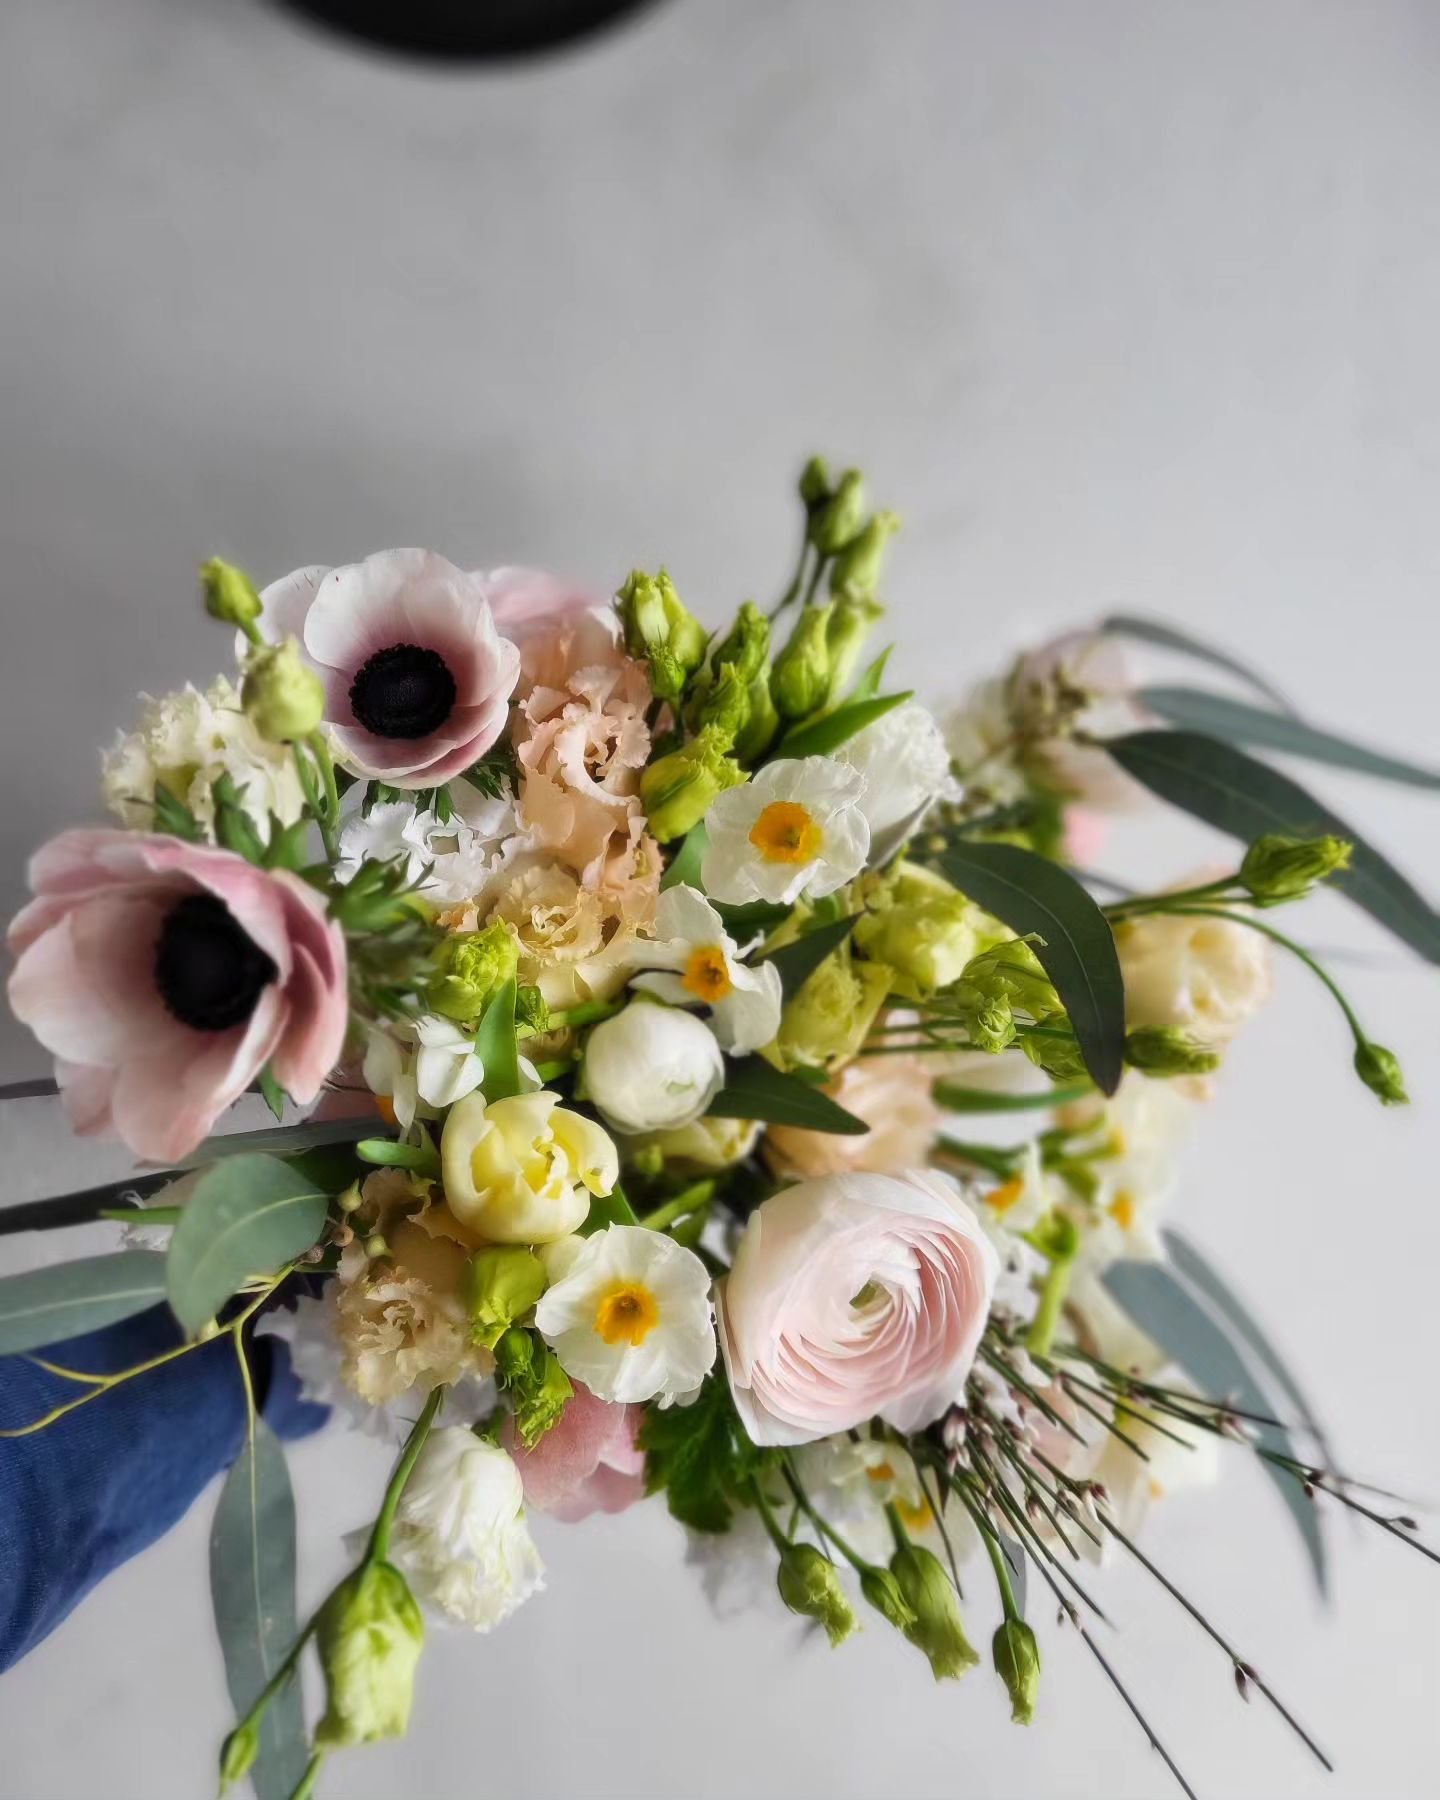 Soft pastels, and a winning combination of anemones, narcissi and ranunculus. Happy Sunday.